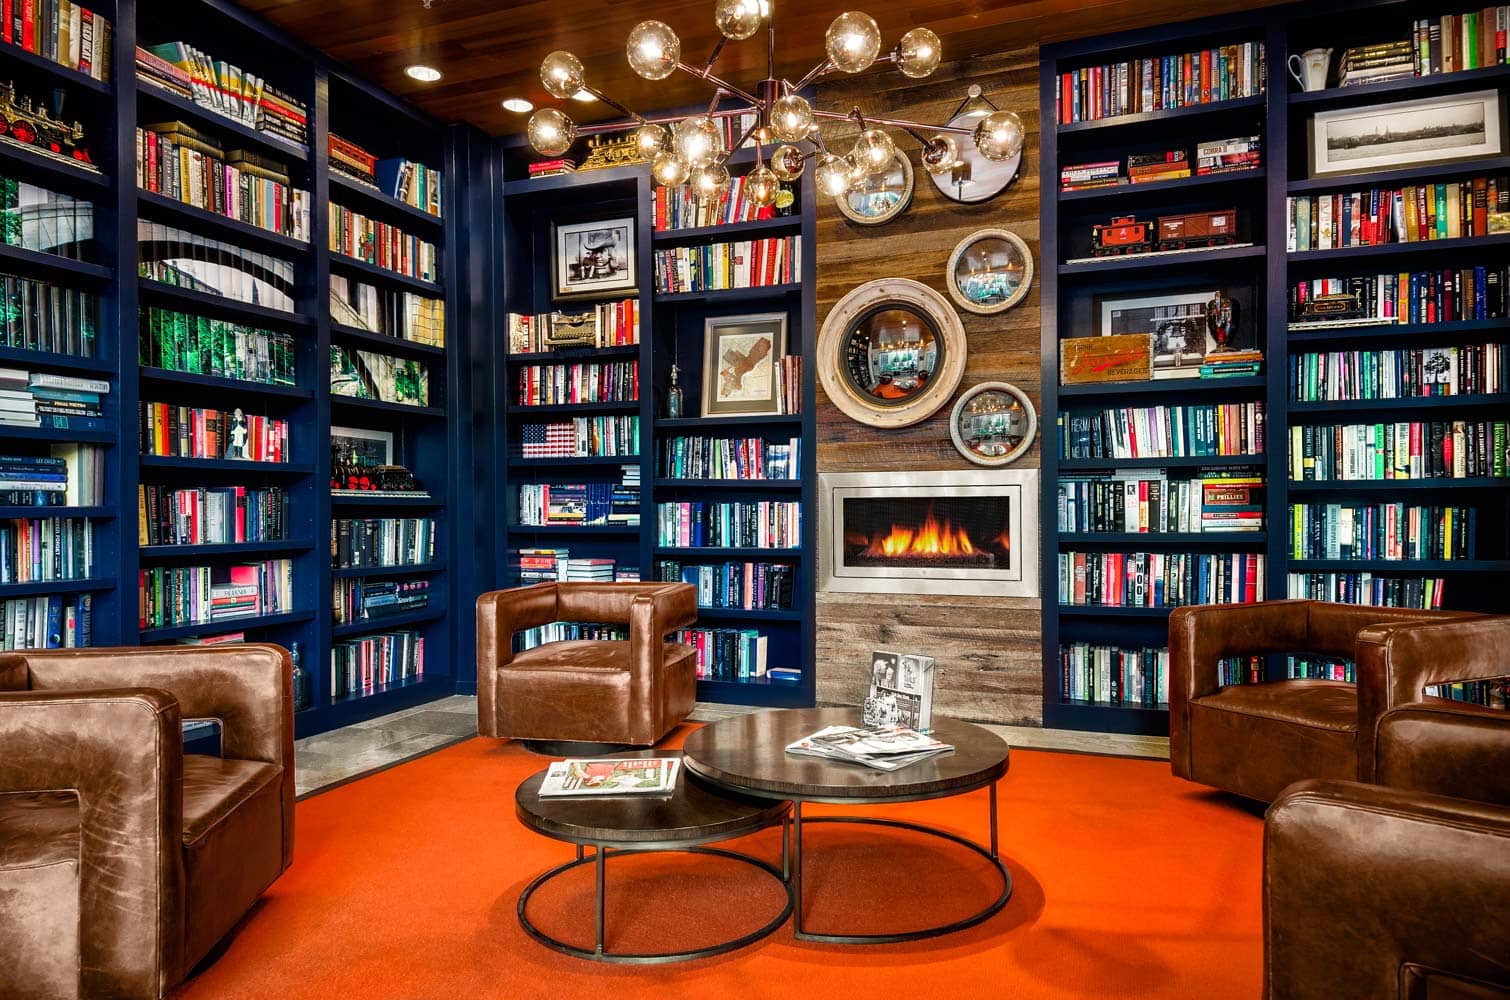 Venice Lofts library interiors designed by Annette Jaffe Interiors